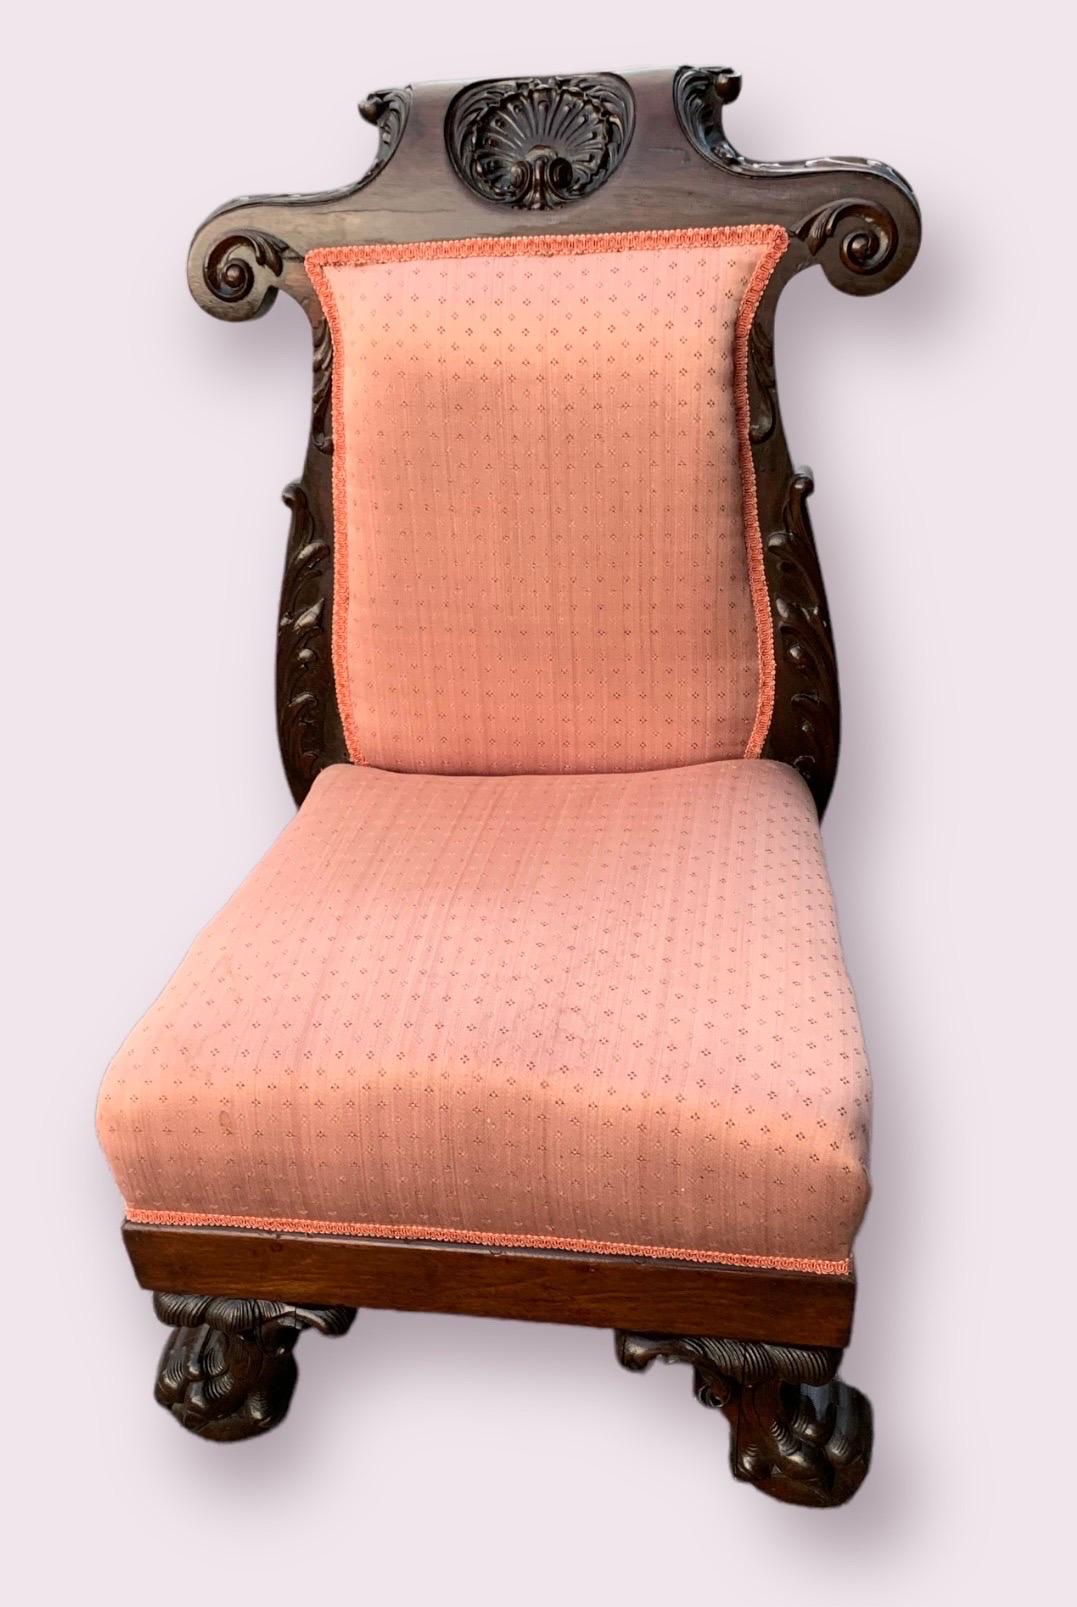 This is an antique prie dieu slipper chair, later 19th century, in hand carved walnut and a light coral colored upholstery. The highly detailed carved shell on the crest makes a beautiful presentation. - Seashells are an ancient Christian
symbol